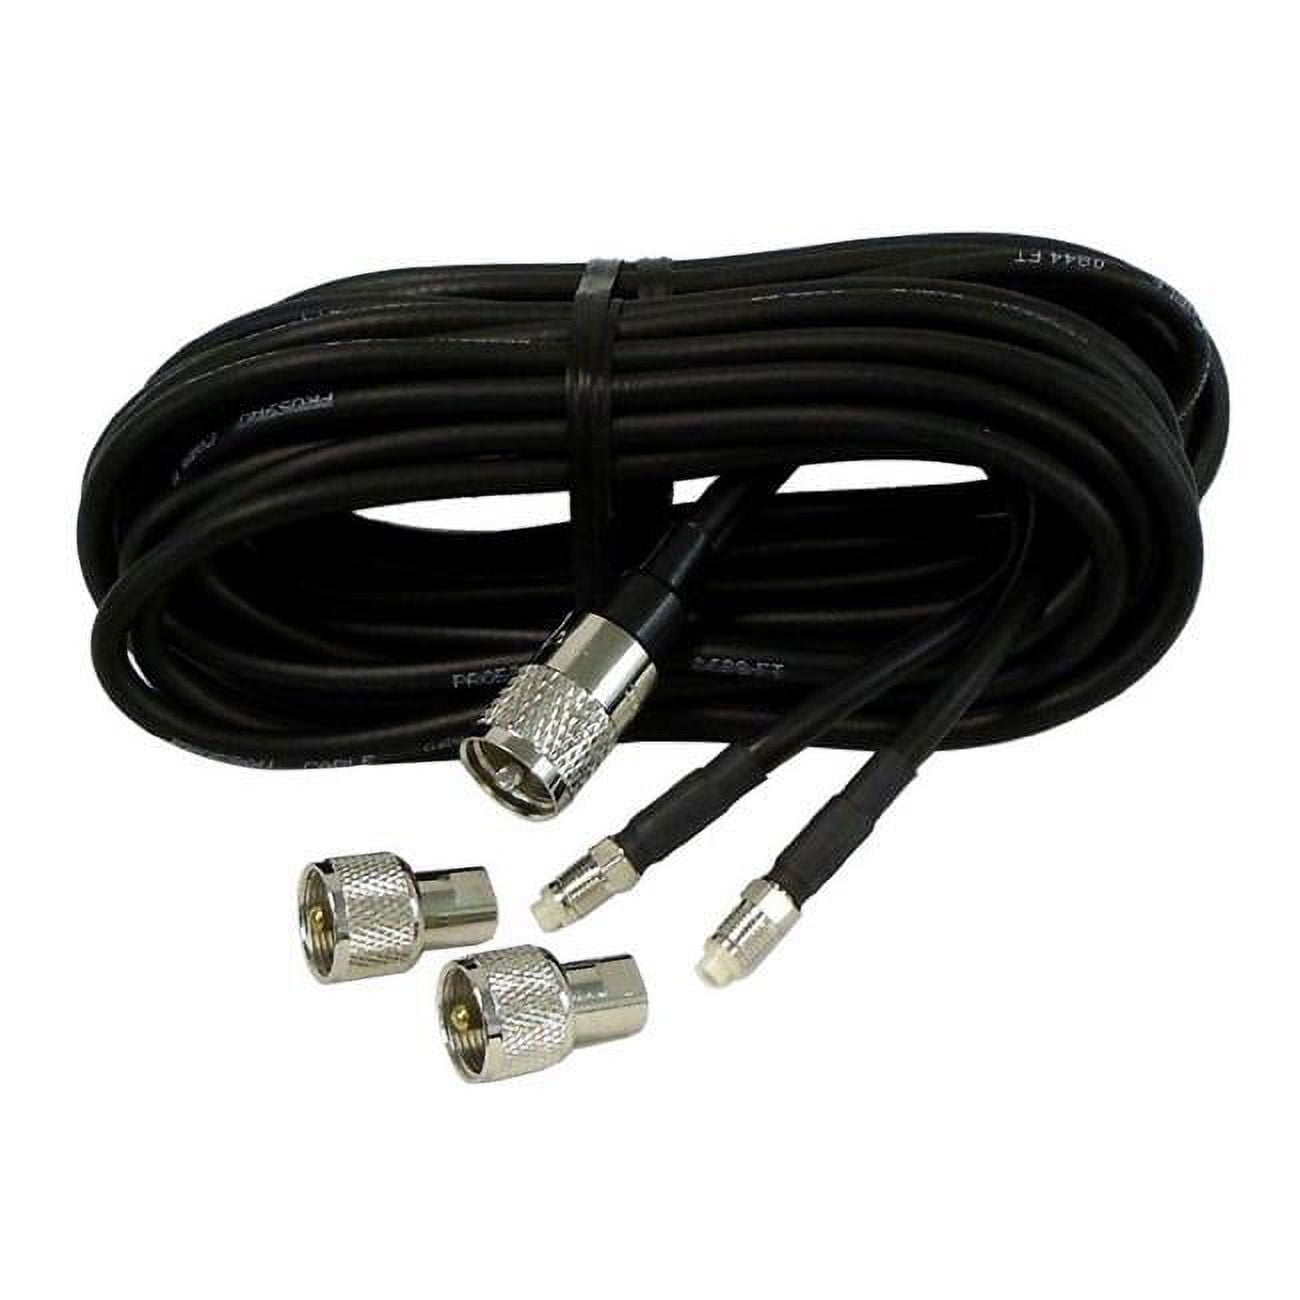 Picture of Procomm DH18N13 18 ft. Co-Phase Harness With Fme Connectors